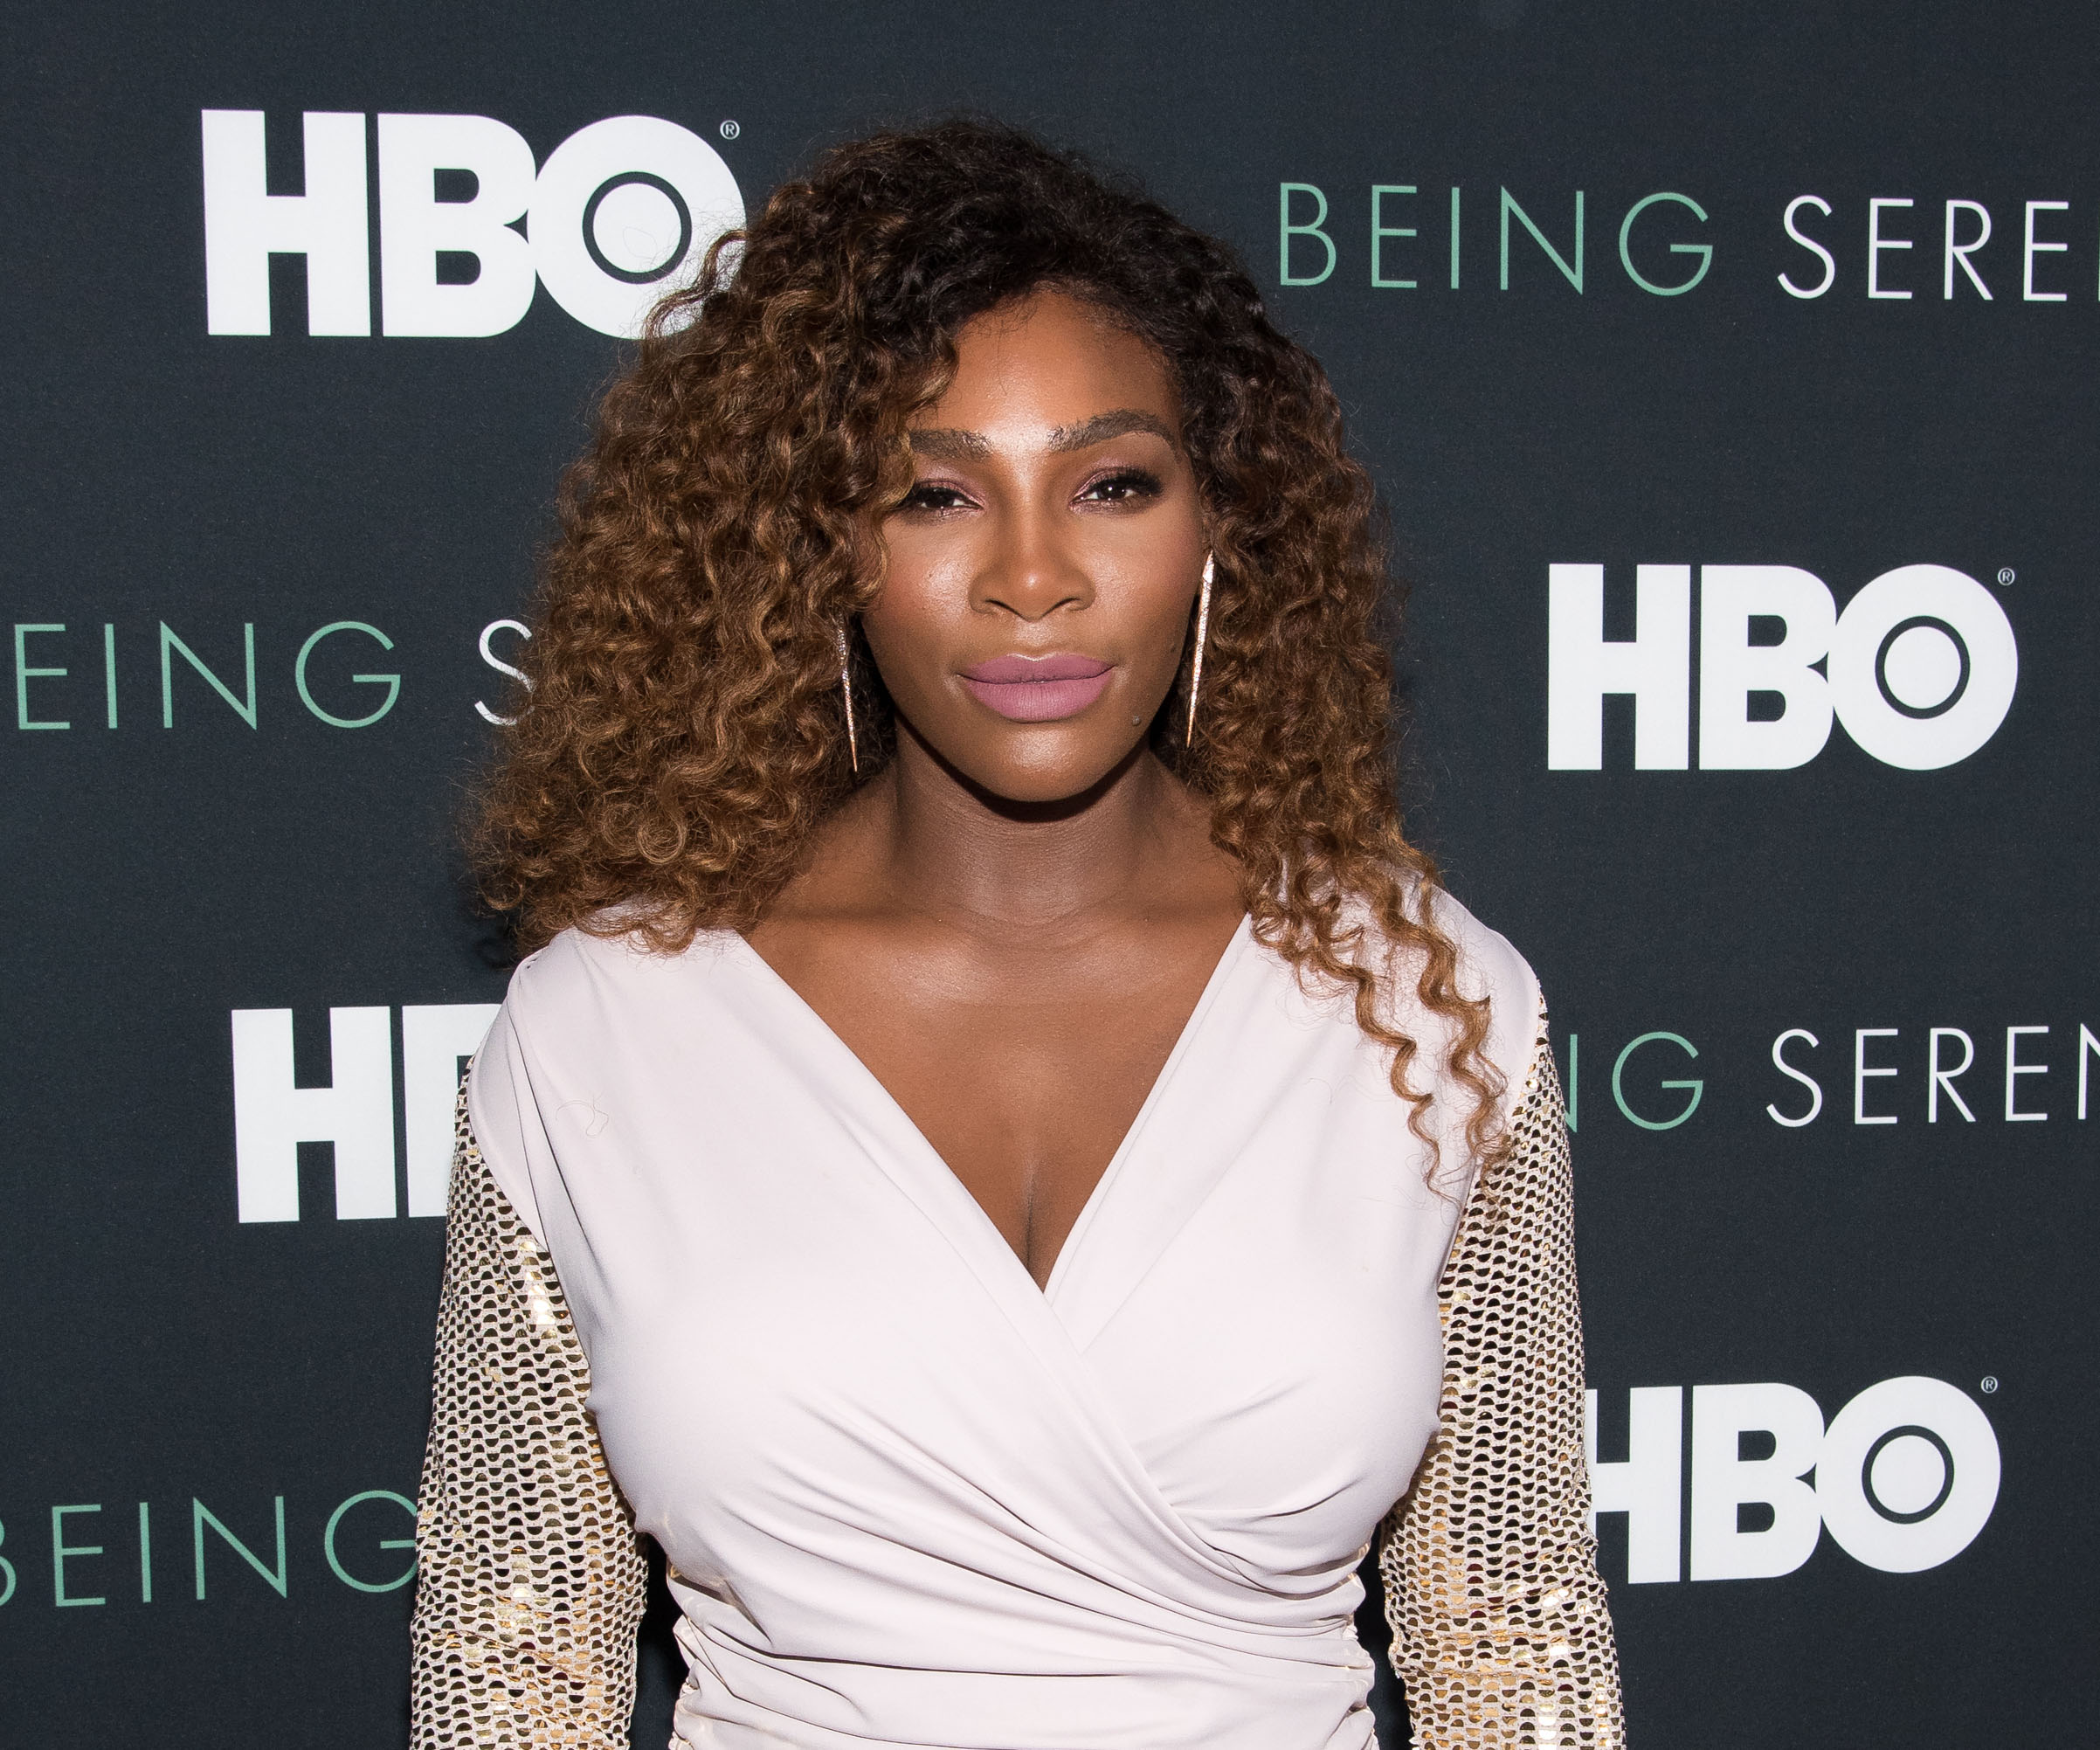 Serena Williams may be turning down her invite to the Royal wedding